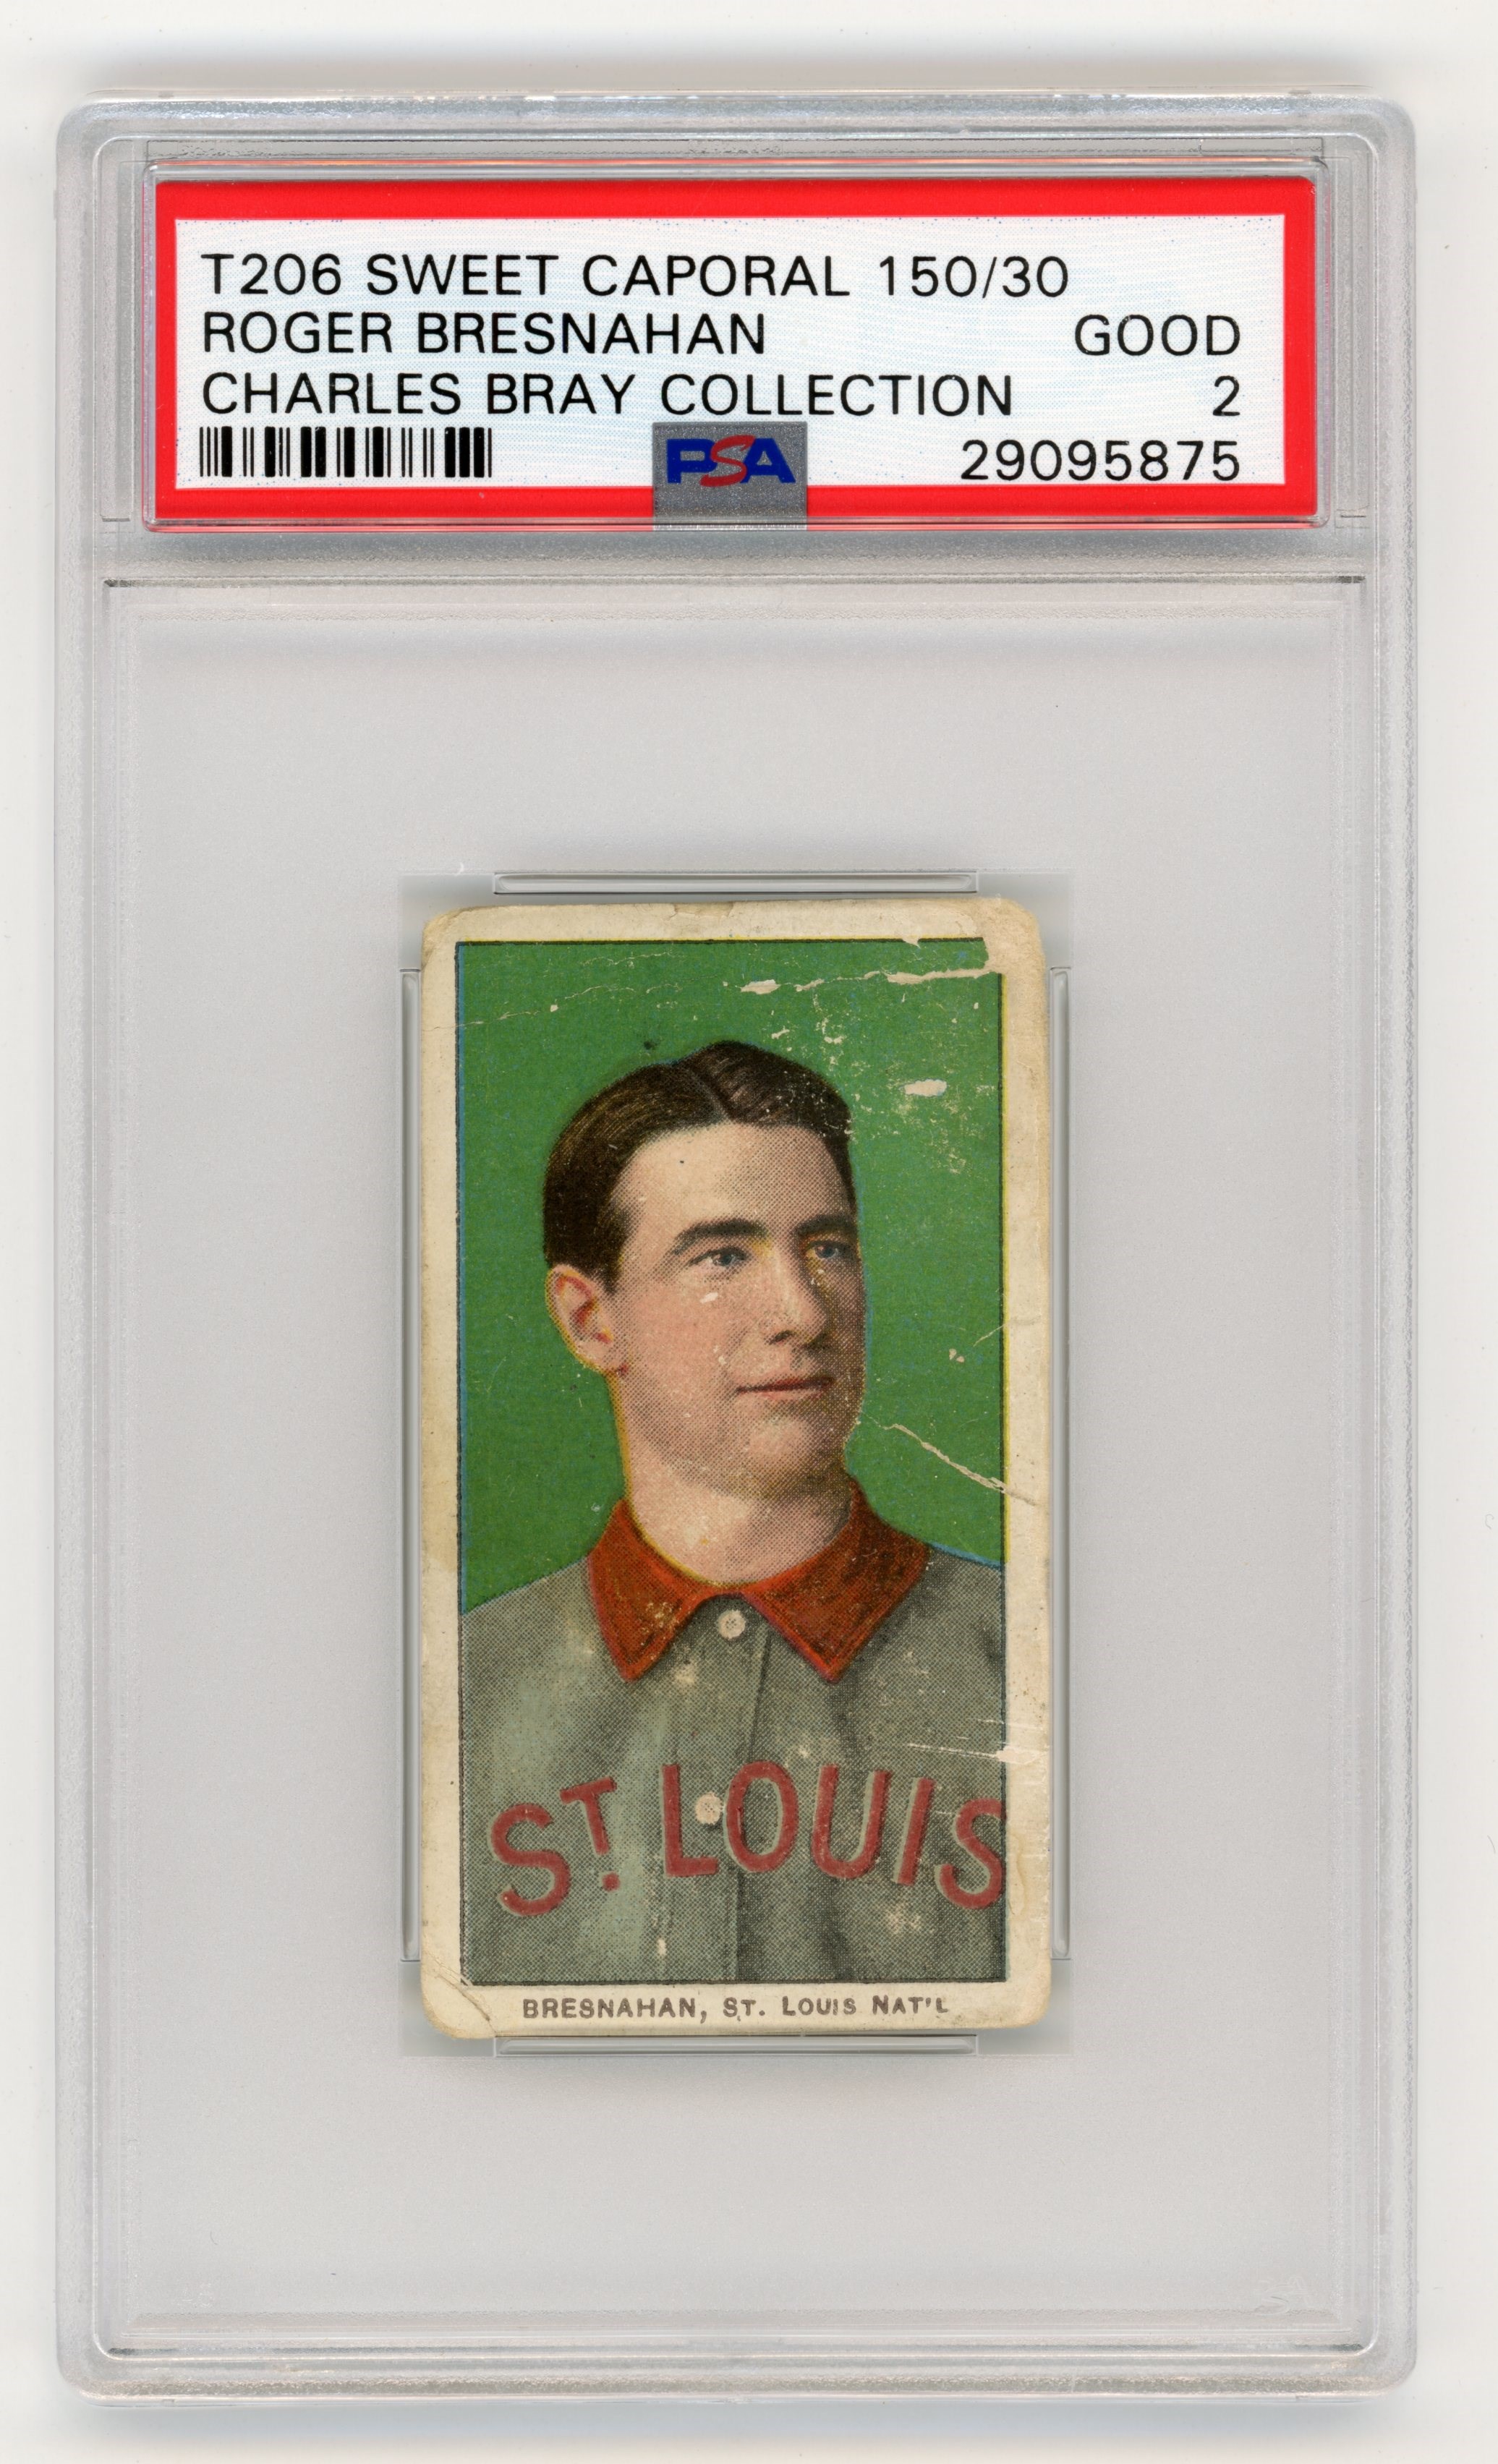 T206 Sweet Caporal 150/30 Roger Bresnahan PSA 2 From Charles Bray Collection